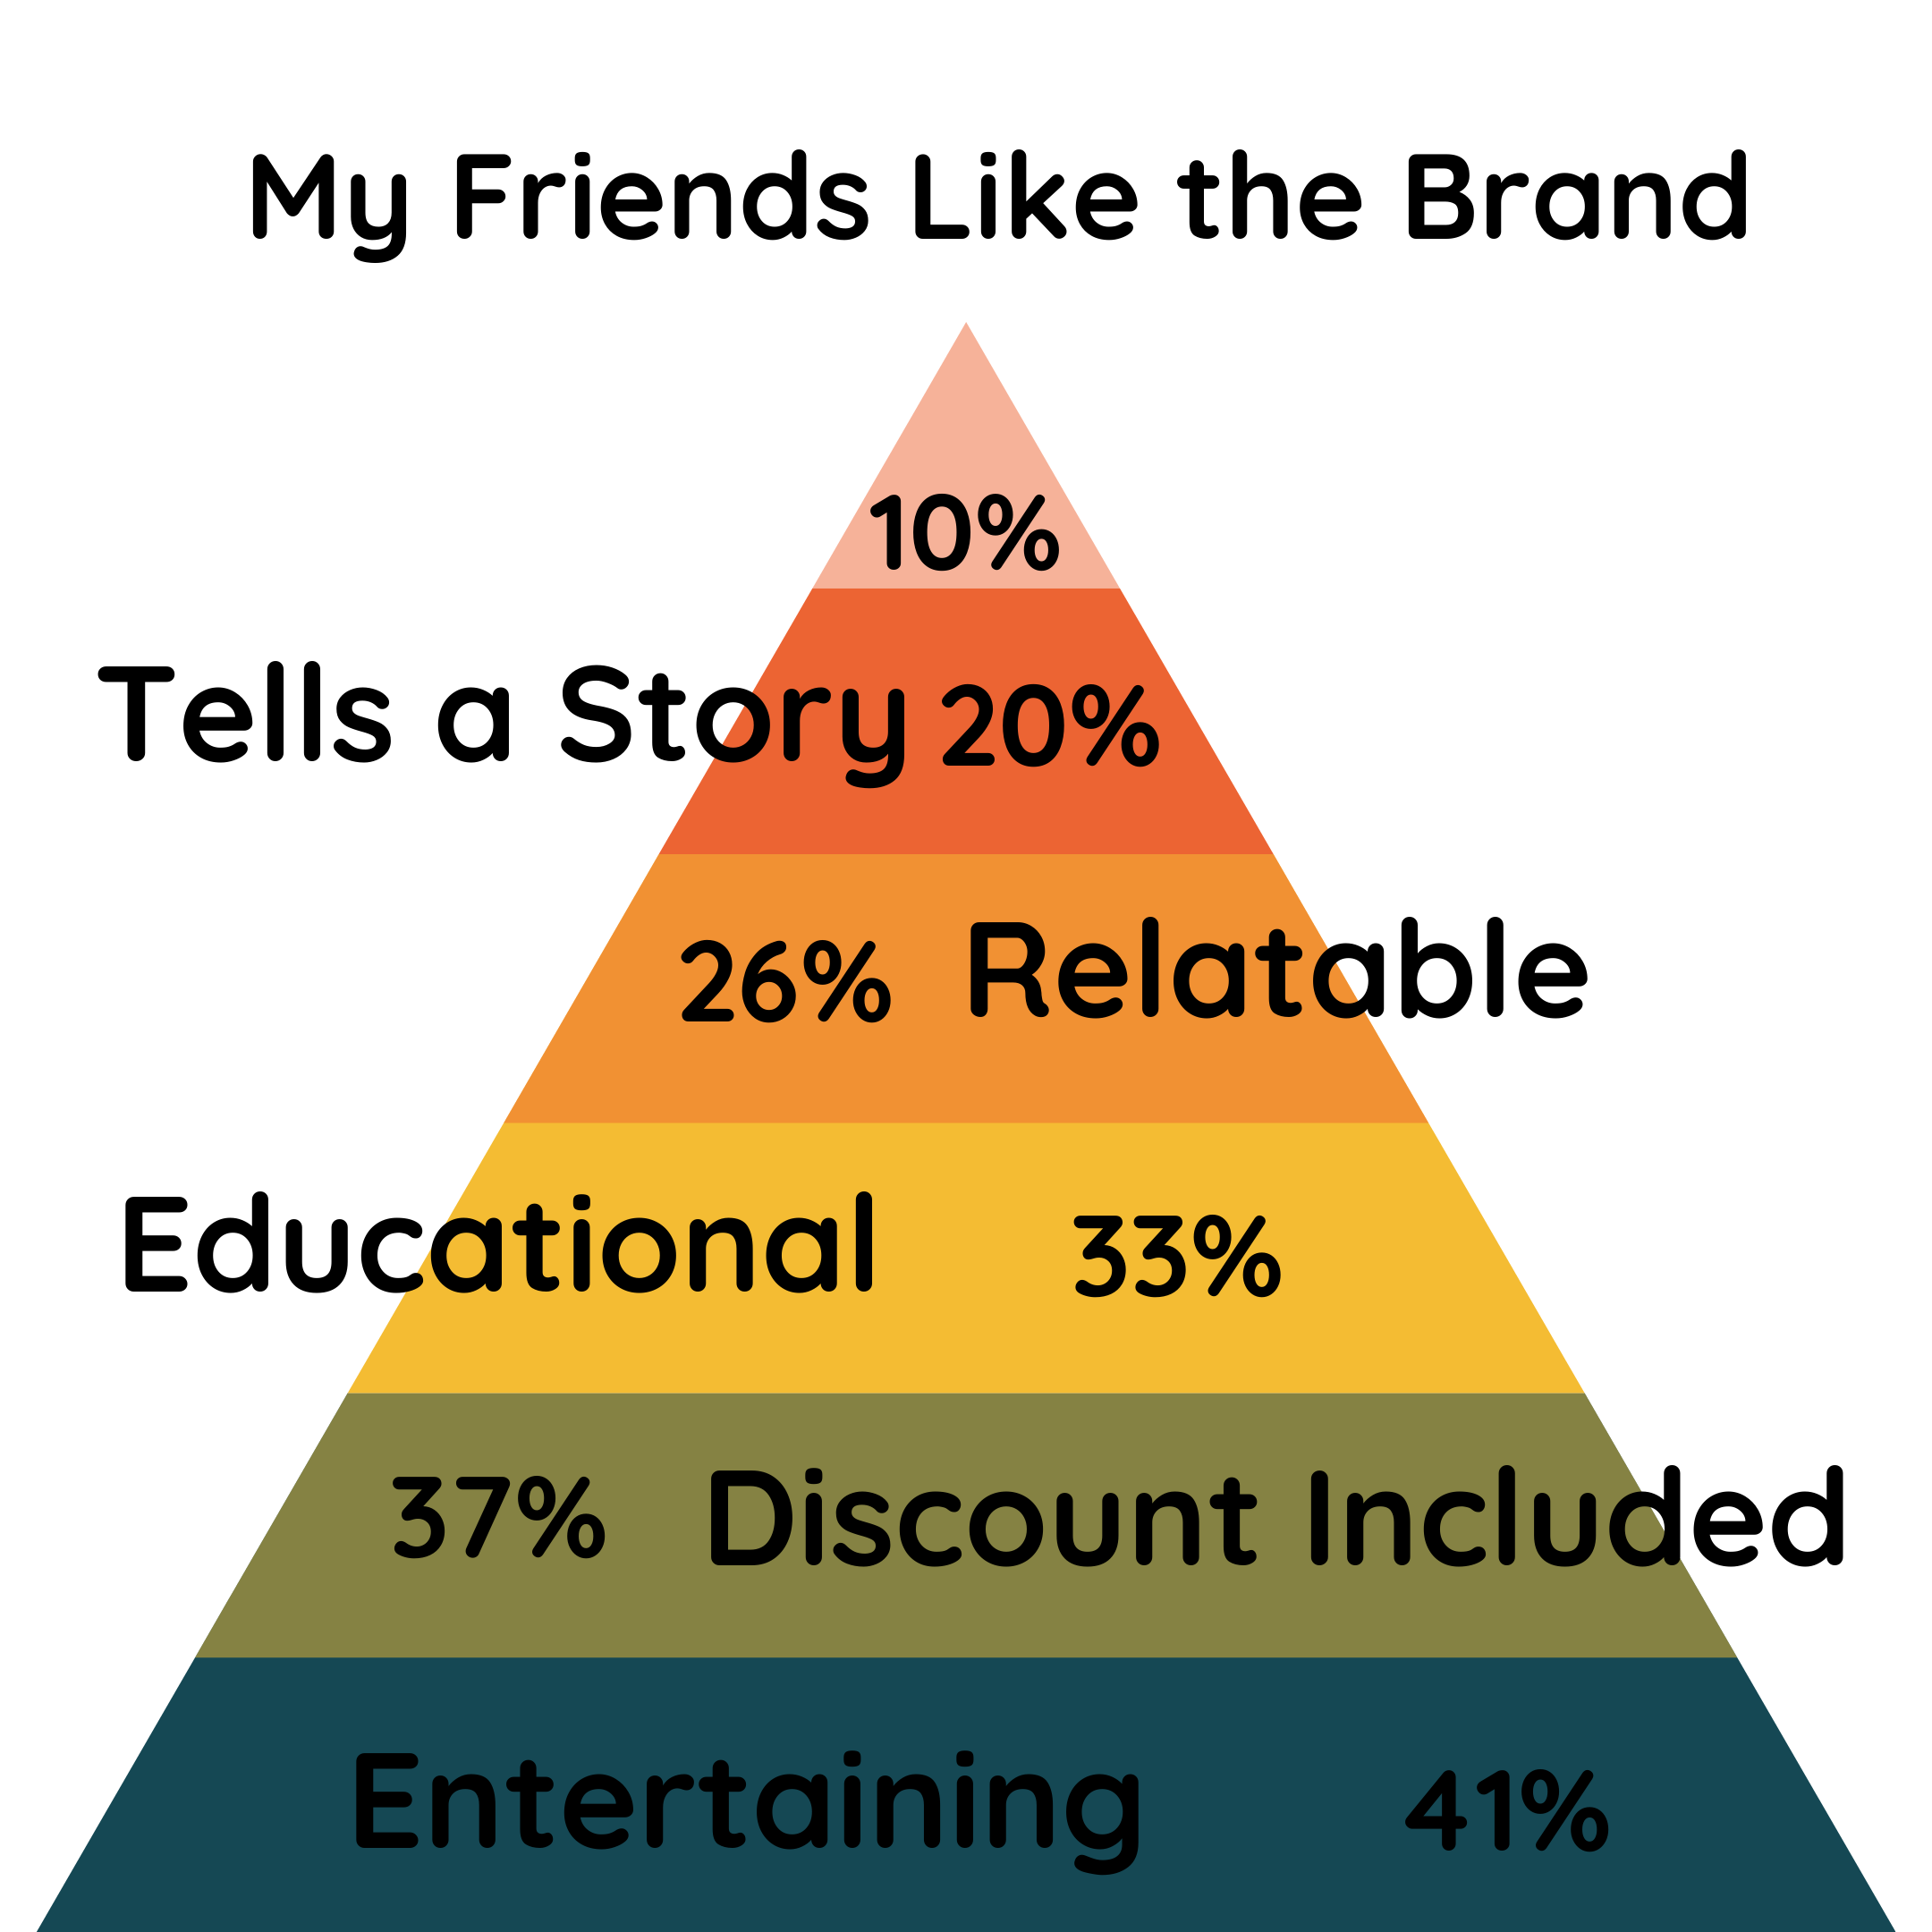 A pyramid representing brand engagement on Facebook